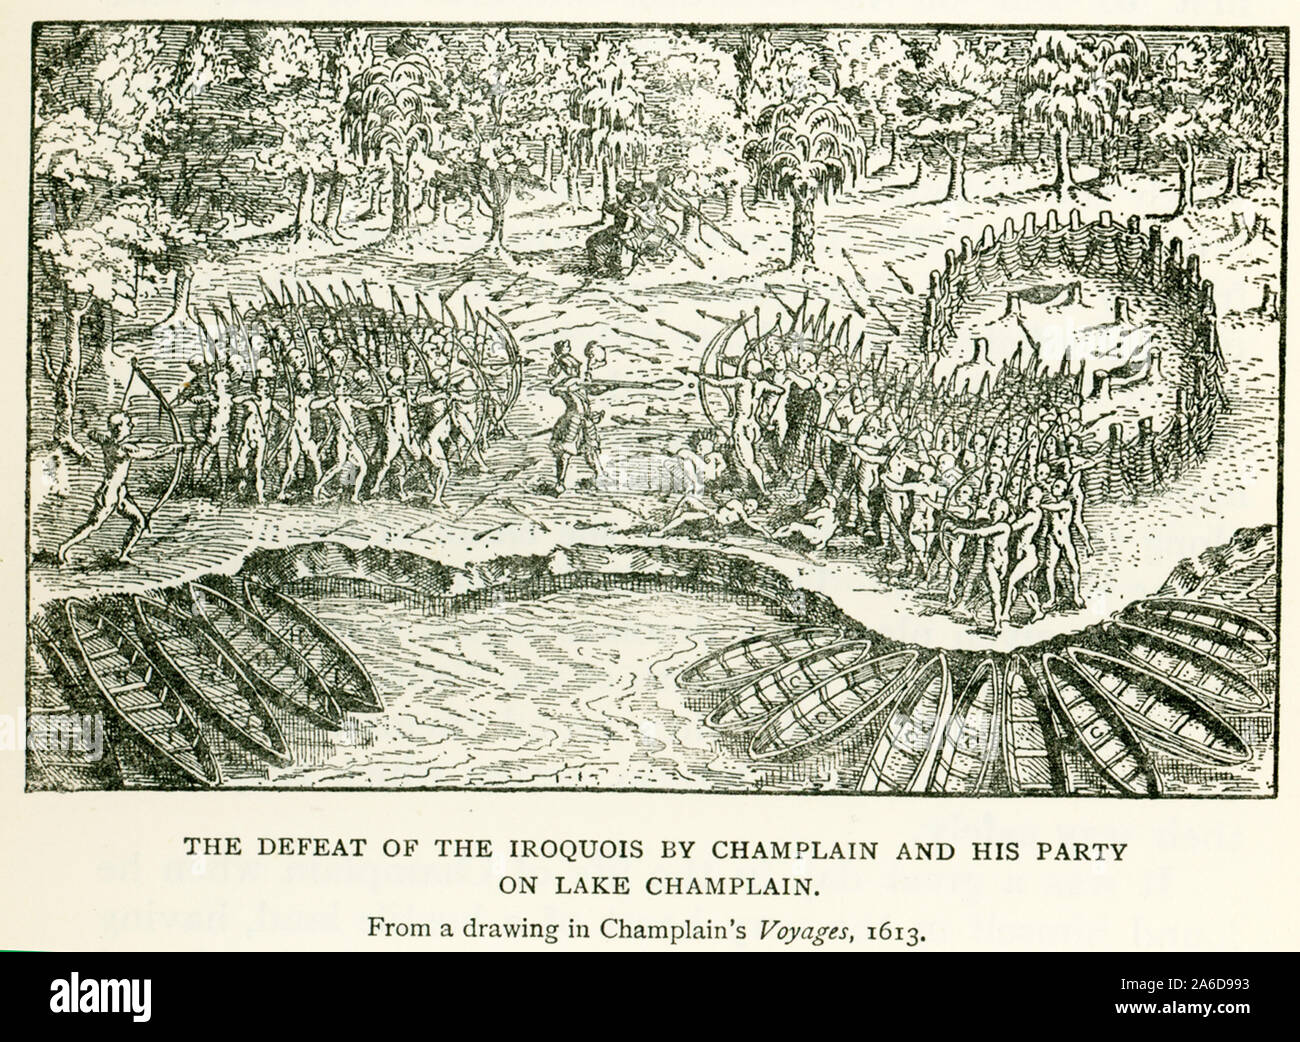 This illustration from a drawing in Champlain’s Voyages published in 1713 shows The defeat of the Iroquois by Champlain and his party of Lake Champlain. Samuel de Champlain was a French colonist, navigator, cartographer, draftsman, soldier, explorer, geographer, ethnologist, diplomat, and chronicler. He made between 21 and 29 trips across the Atlantic Ocean, and founded Quebec, and New France, on July 3, 1608. Stock Photo